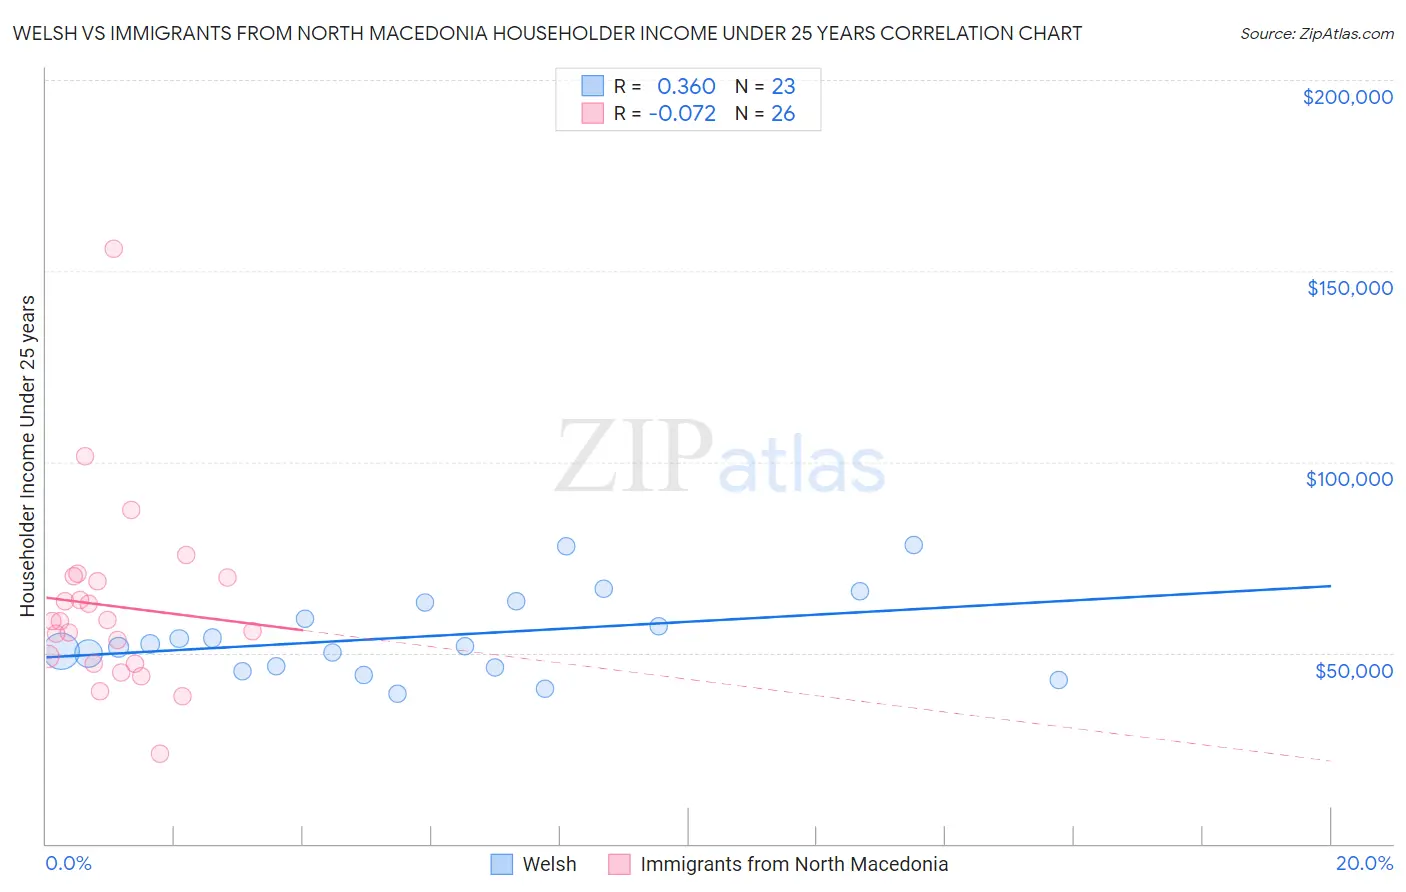 Welsh vs Immigrants from North Macedonia Householder Income Under 25 years